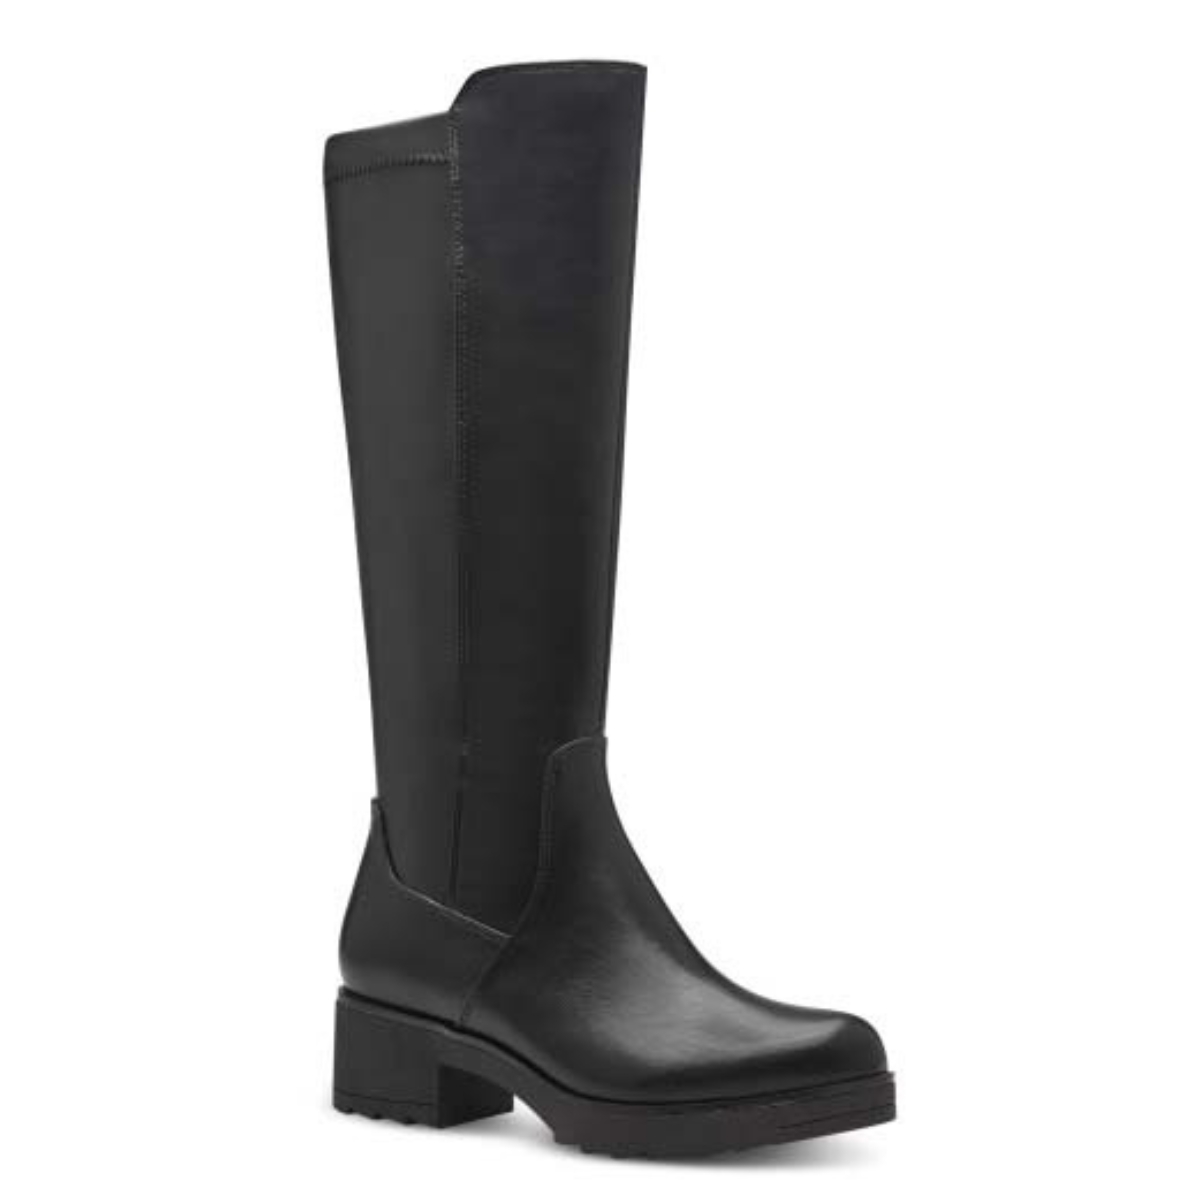 Marco Tozzi Dono Long Black Womens Knee-High Boots 25606-41-001 In Size 37 In Plain Black